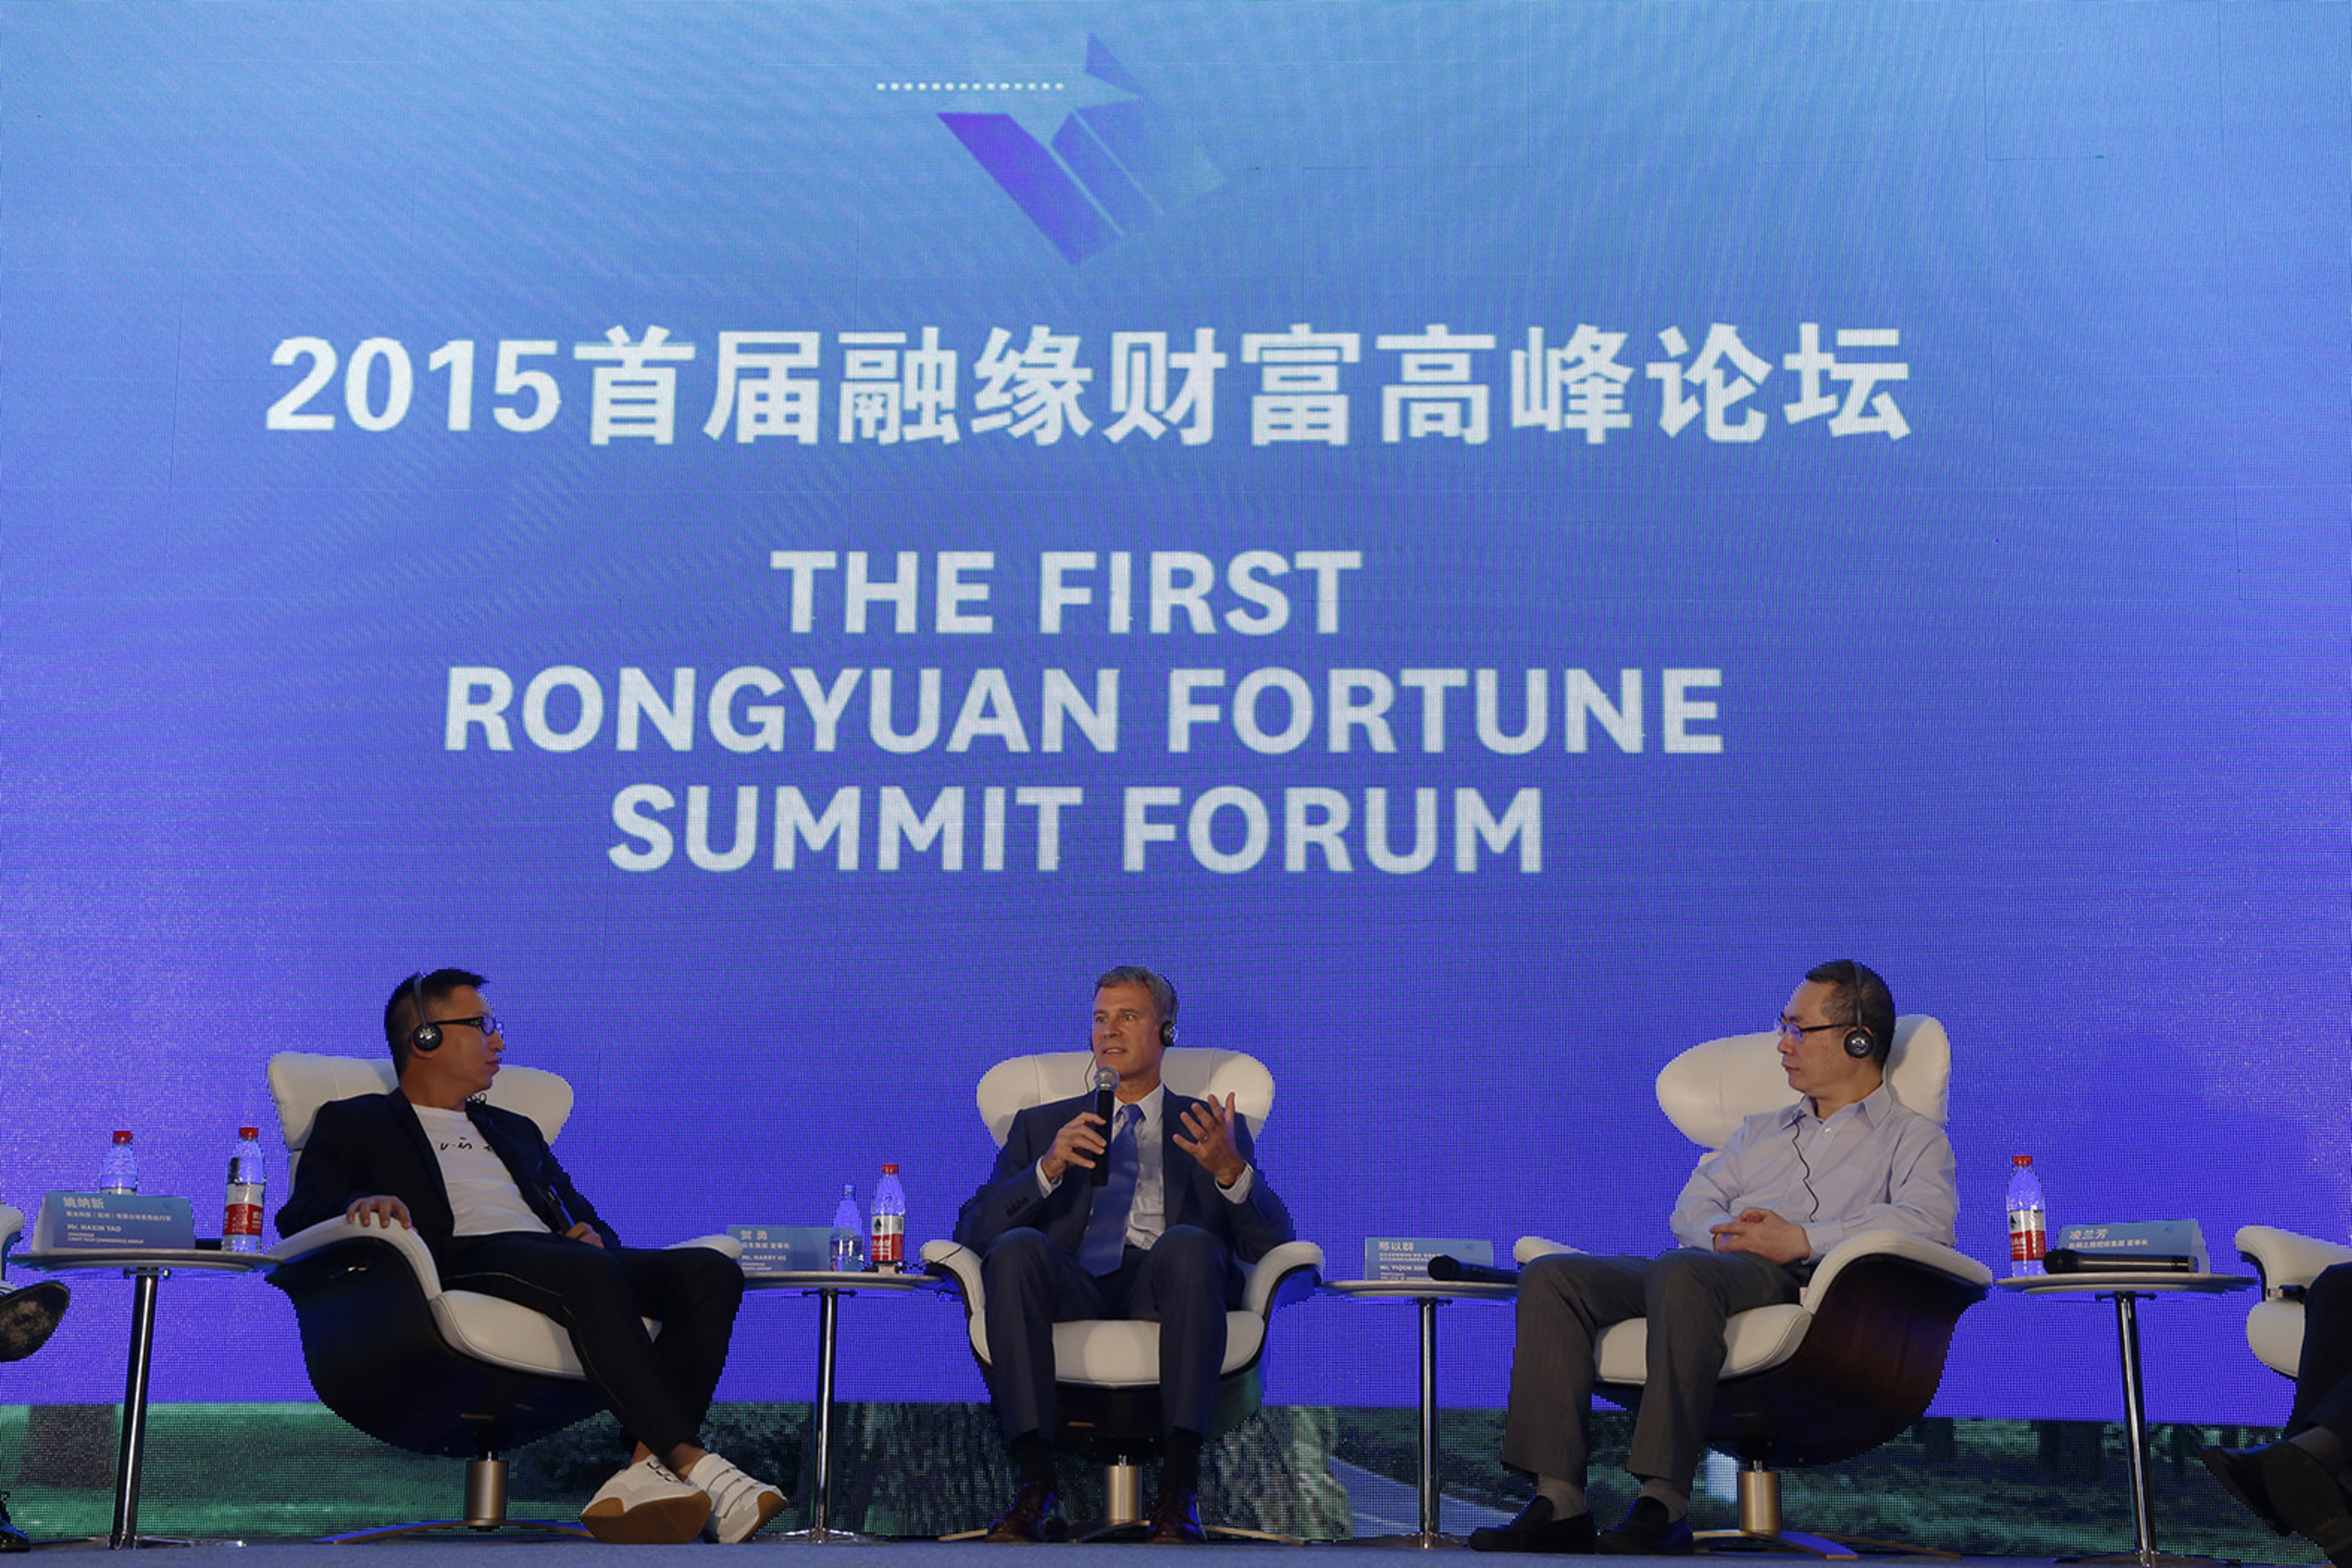 The first Rongyuan Fortune Summit Forum 2015